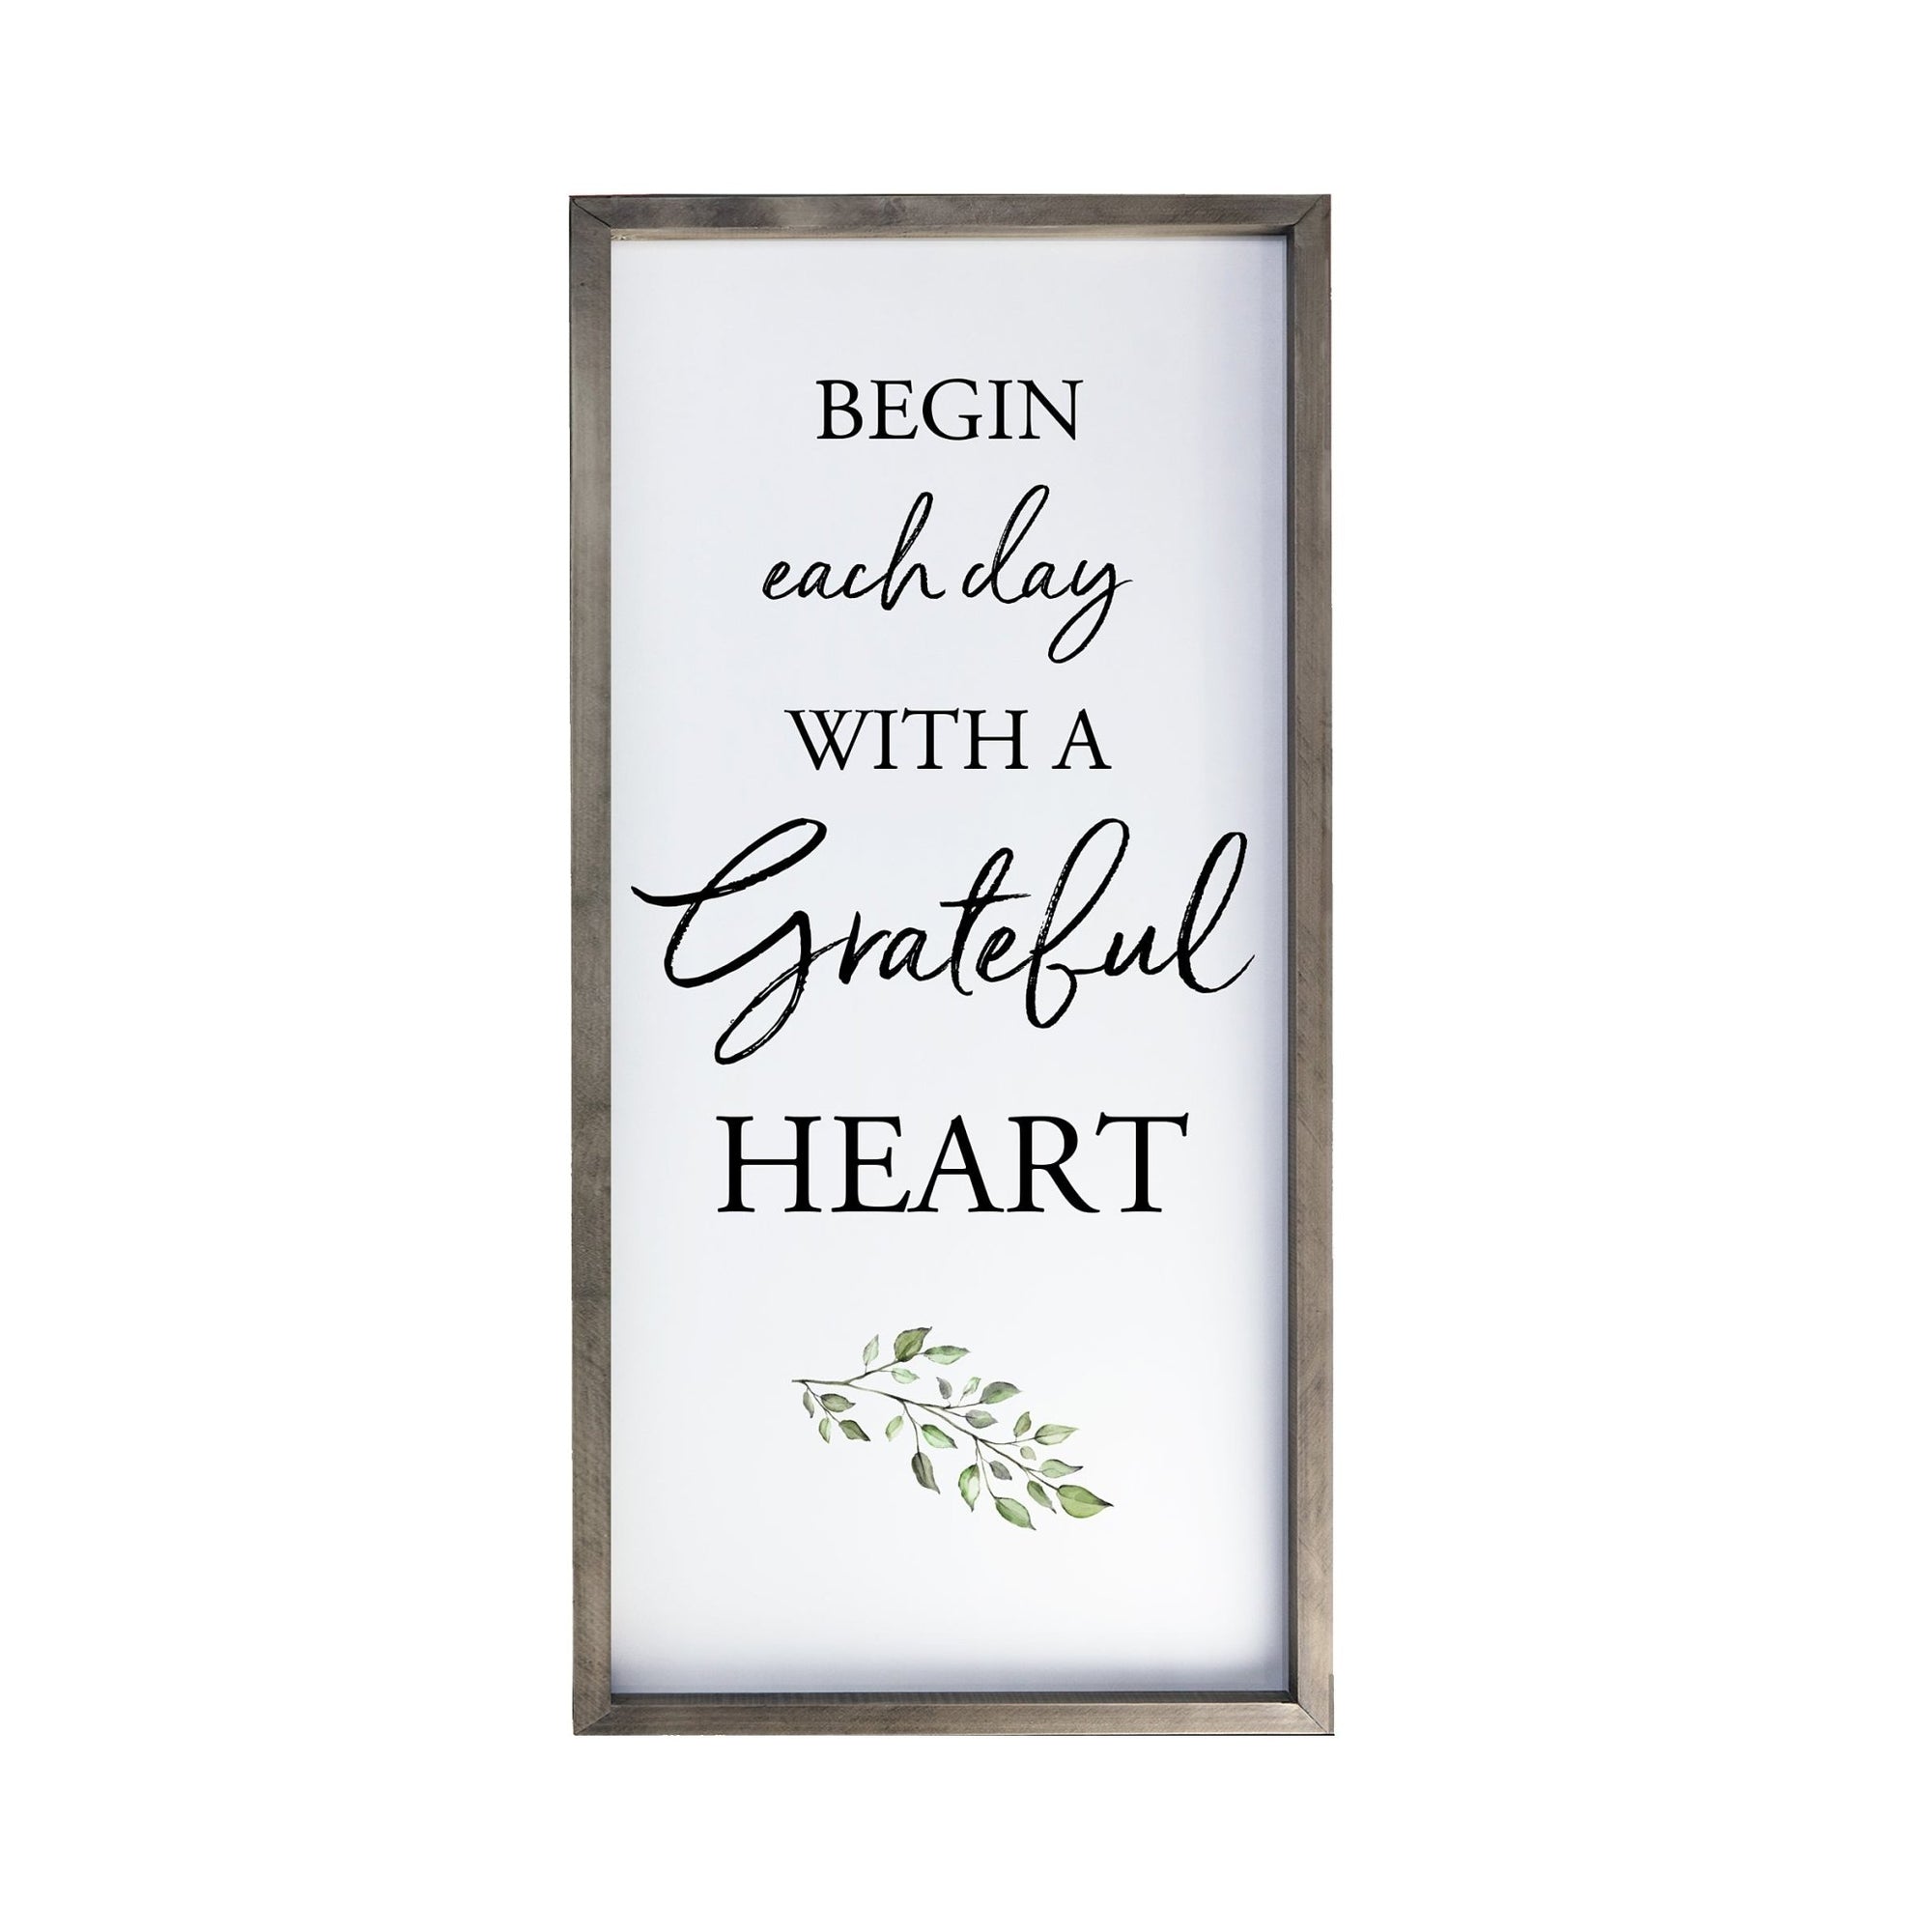 Large Family Wall Decor Quote Sign For Home 18 x 36 - Begin Each Day With - LifeSong Milestones